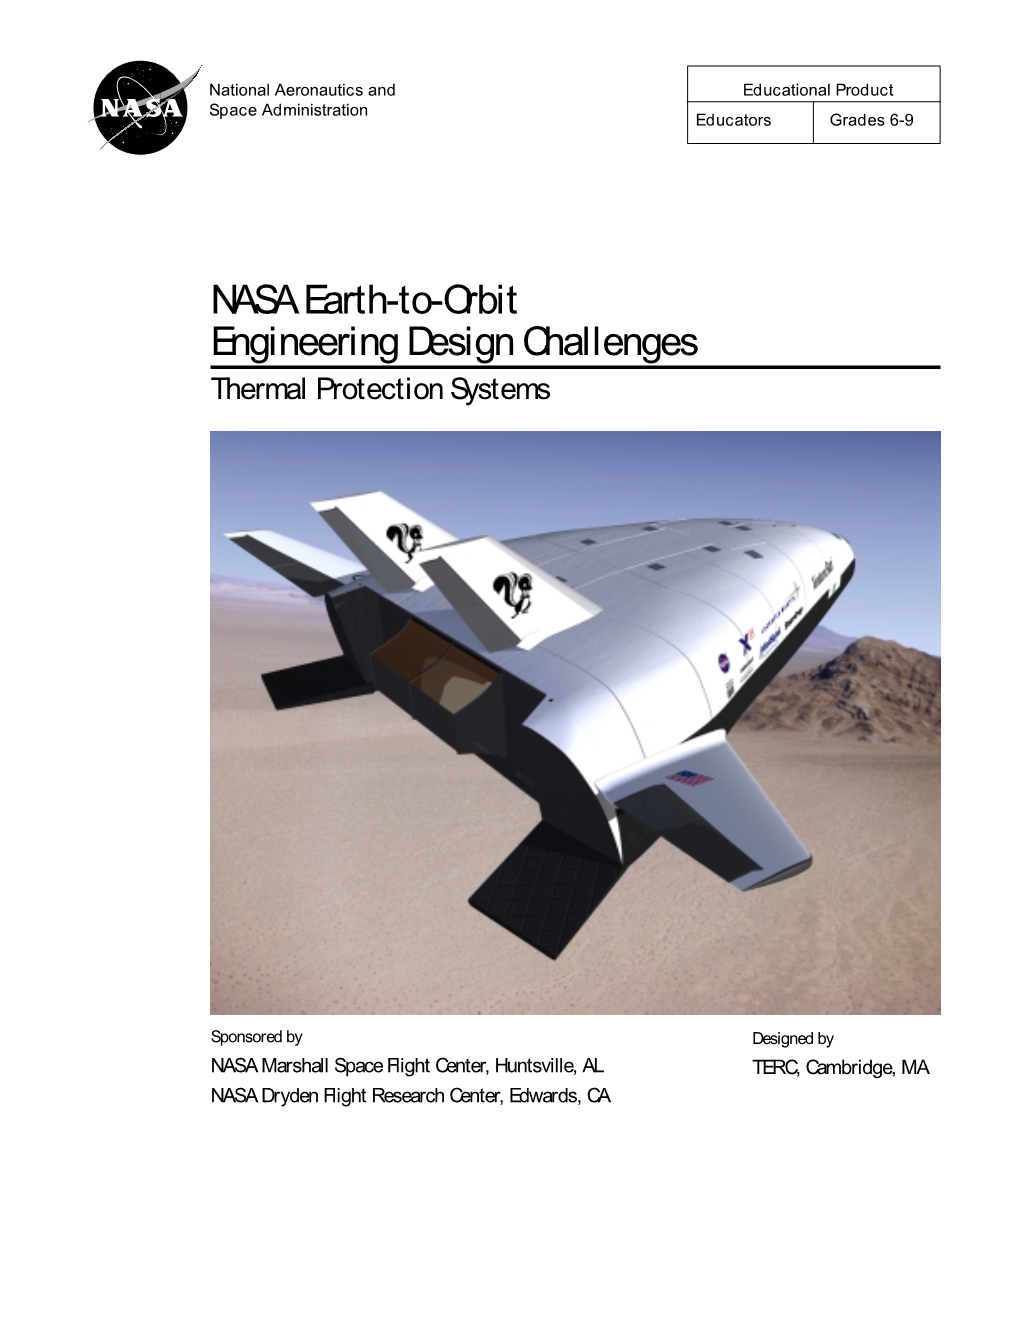 NASA Earth-To-Orbit Engineering Design Challenges Thermal Protection Systems